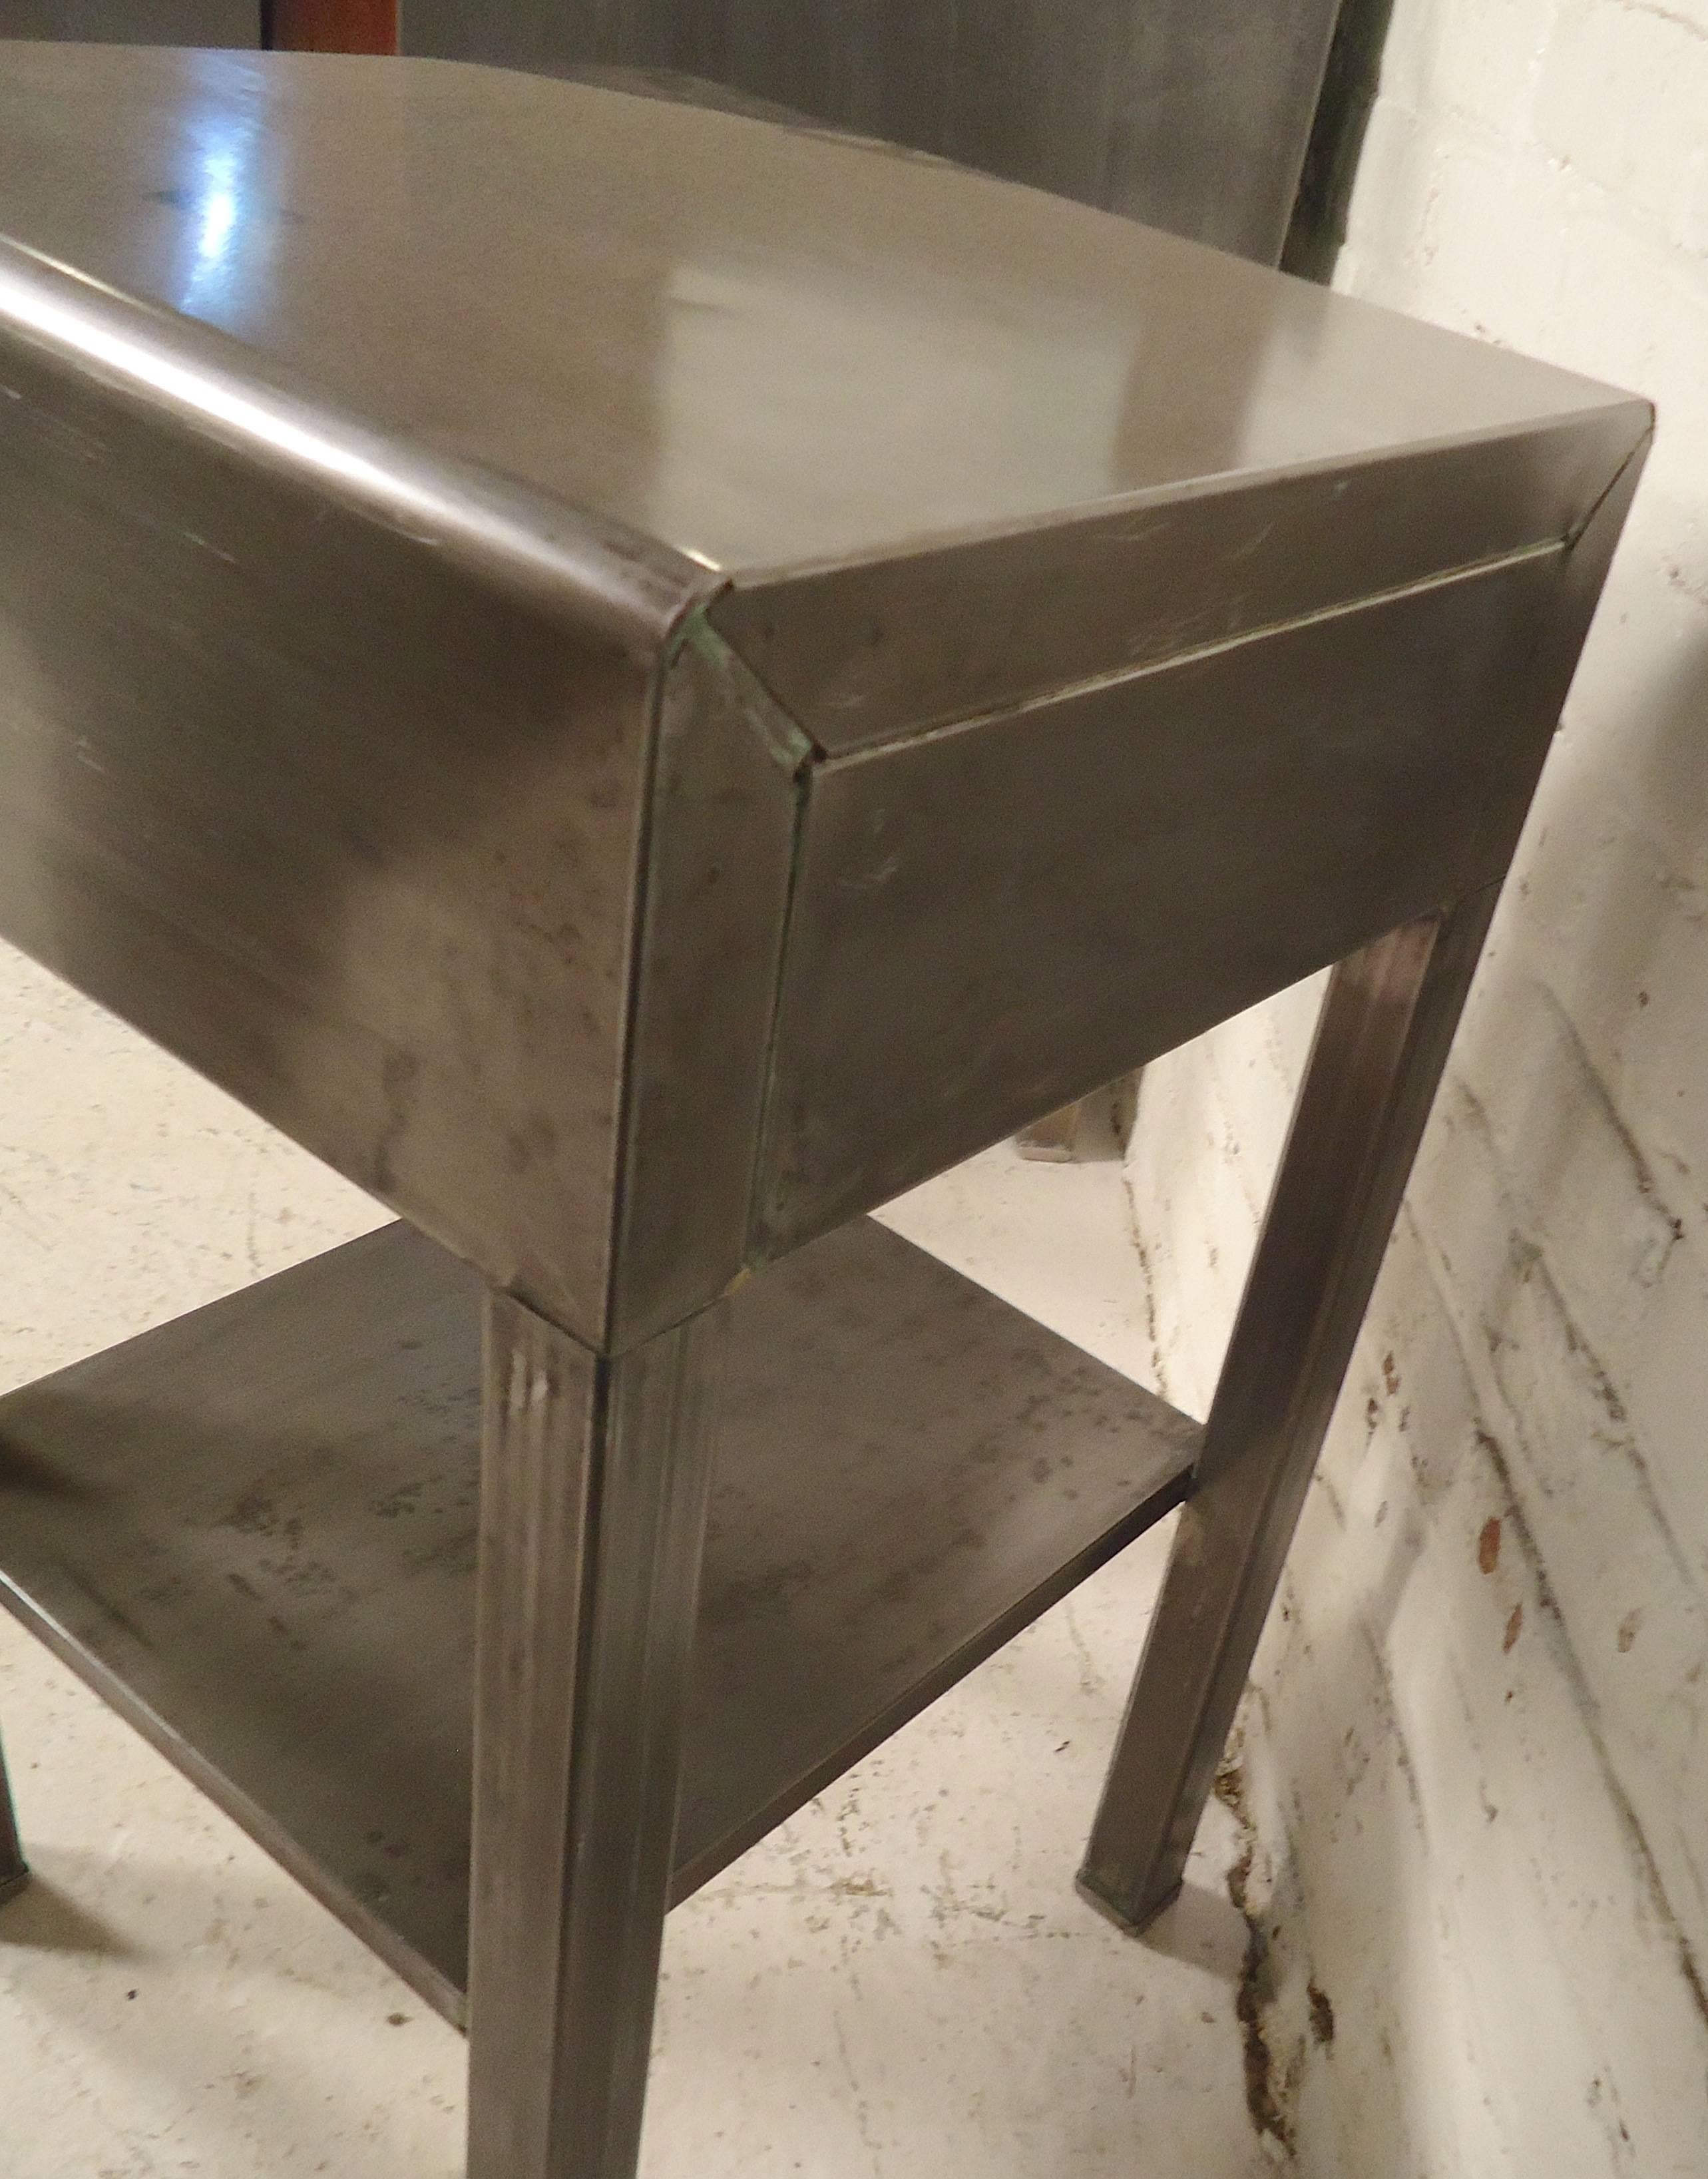 Vintage modern nightstand by Simmons with storage drawer and shelf. Restored in a unique industrial style finish.
(Matching dresser available.)

(Please confirm item location - NY or NJ - with dealer.)
  